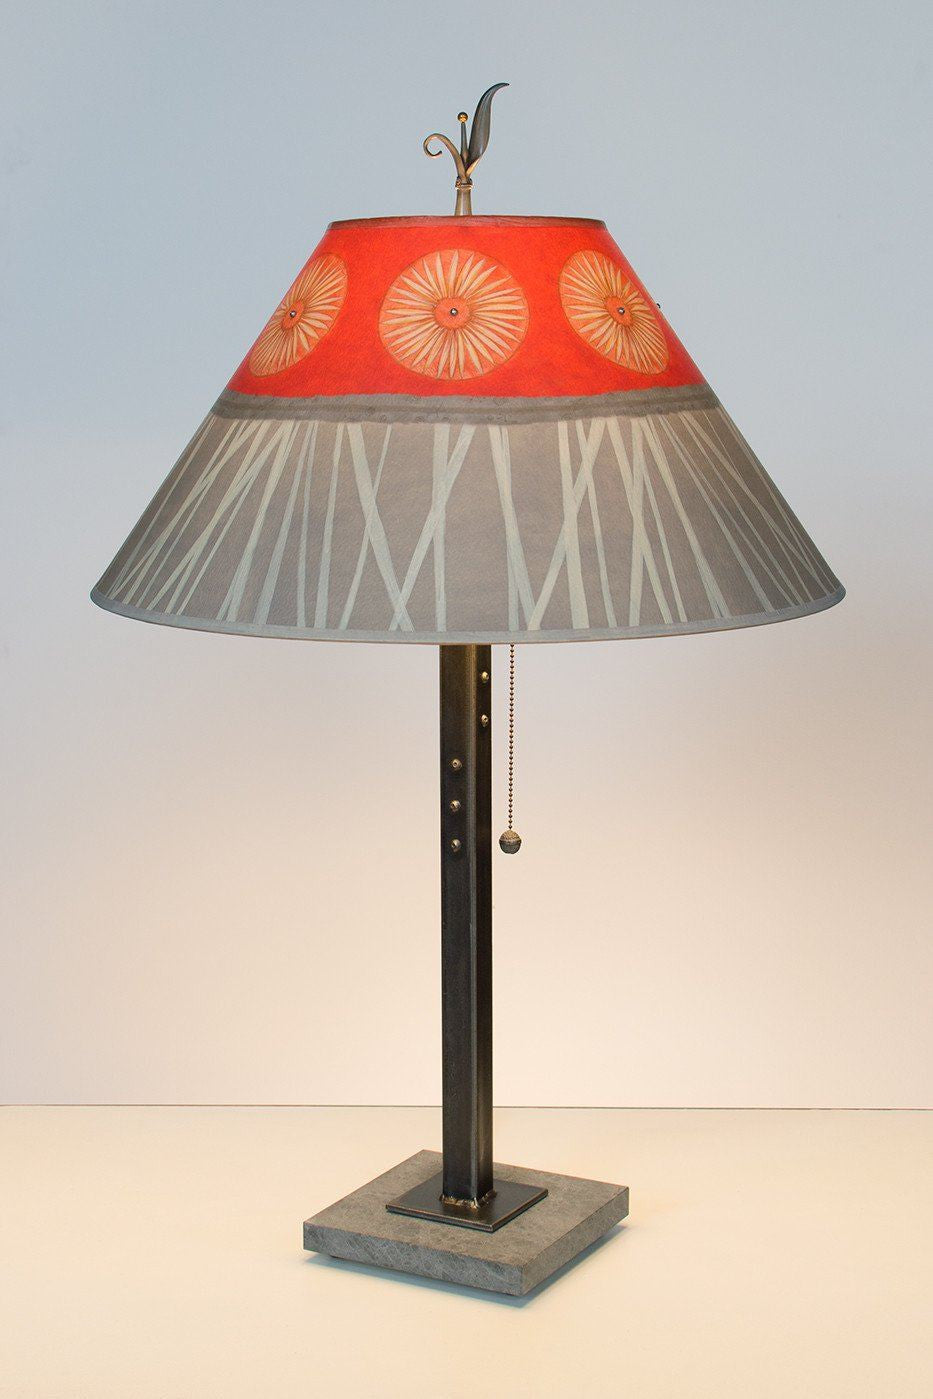 Steel Table Lamp on Italian Marble with Large Conical Shade in Tang